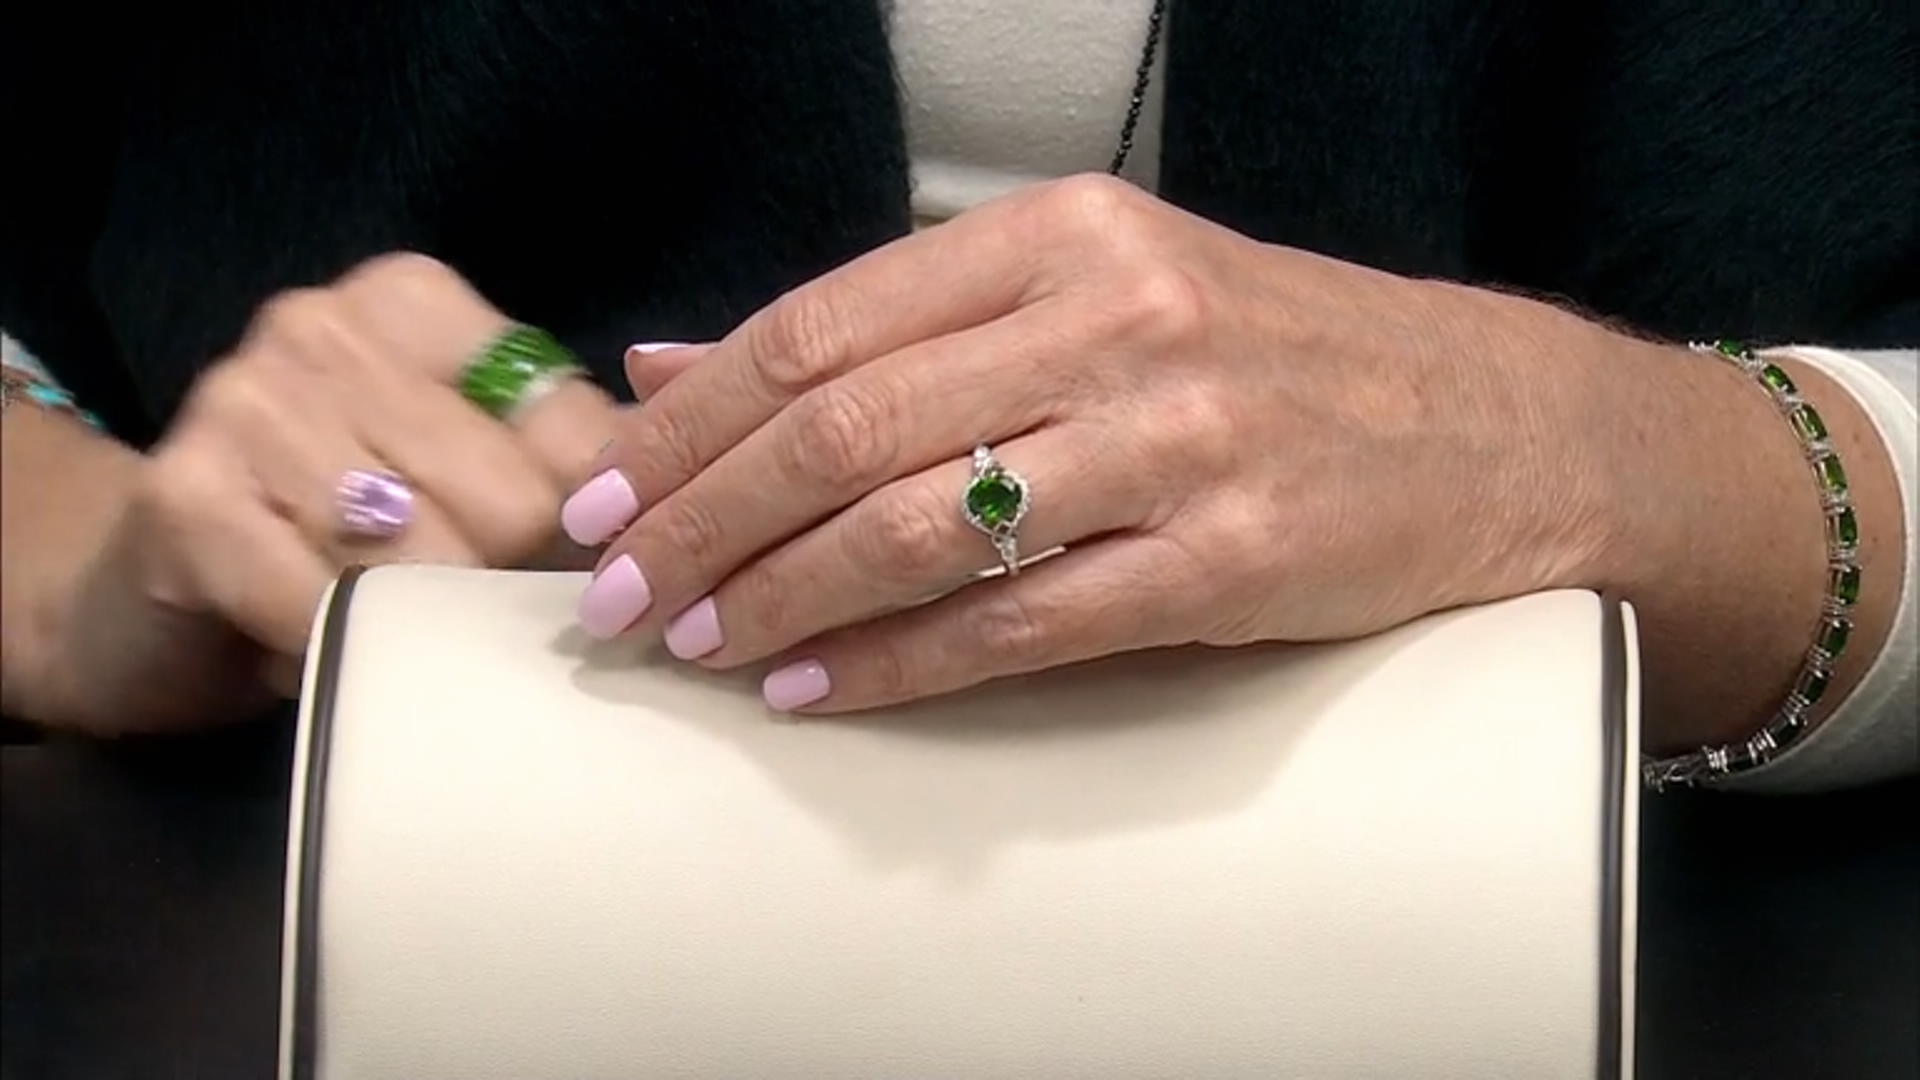 Green Chrome Diopside Rhodium Over Sterling Silver Ring 2.10ctw Video Thumbnail